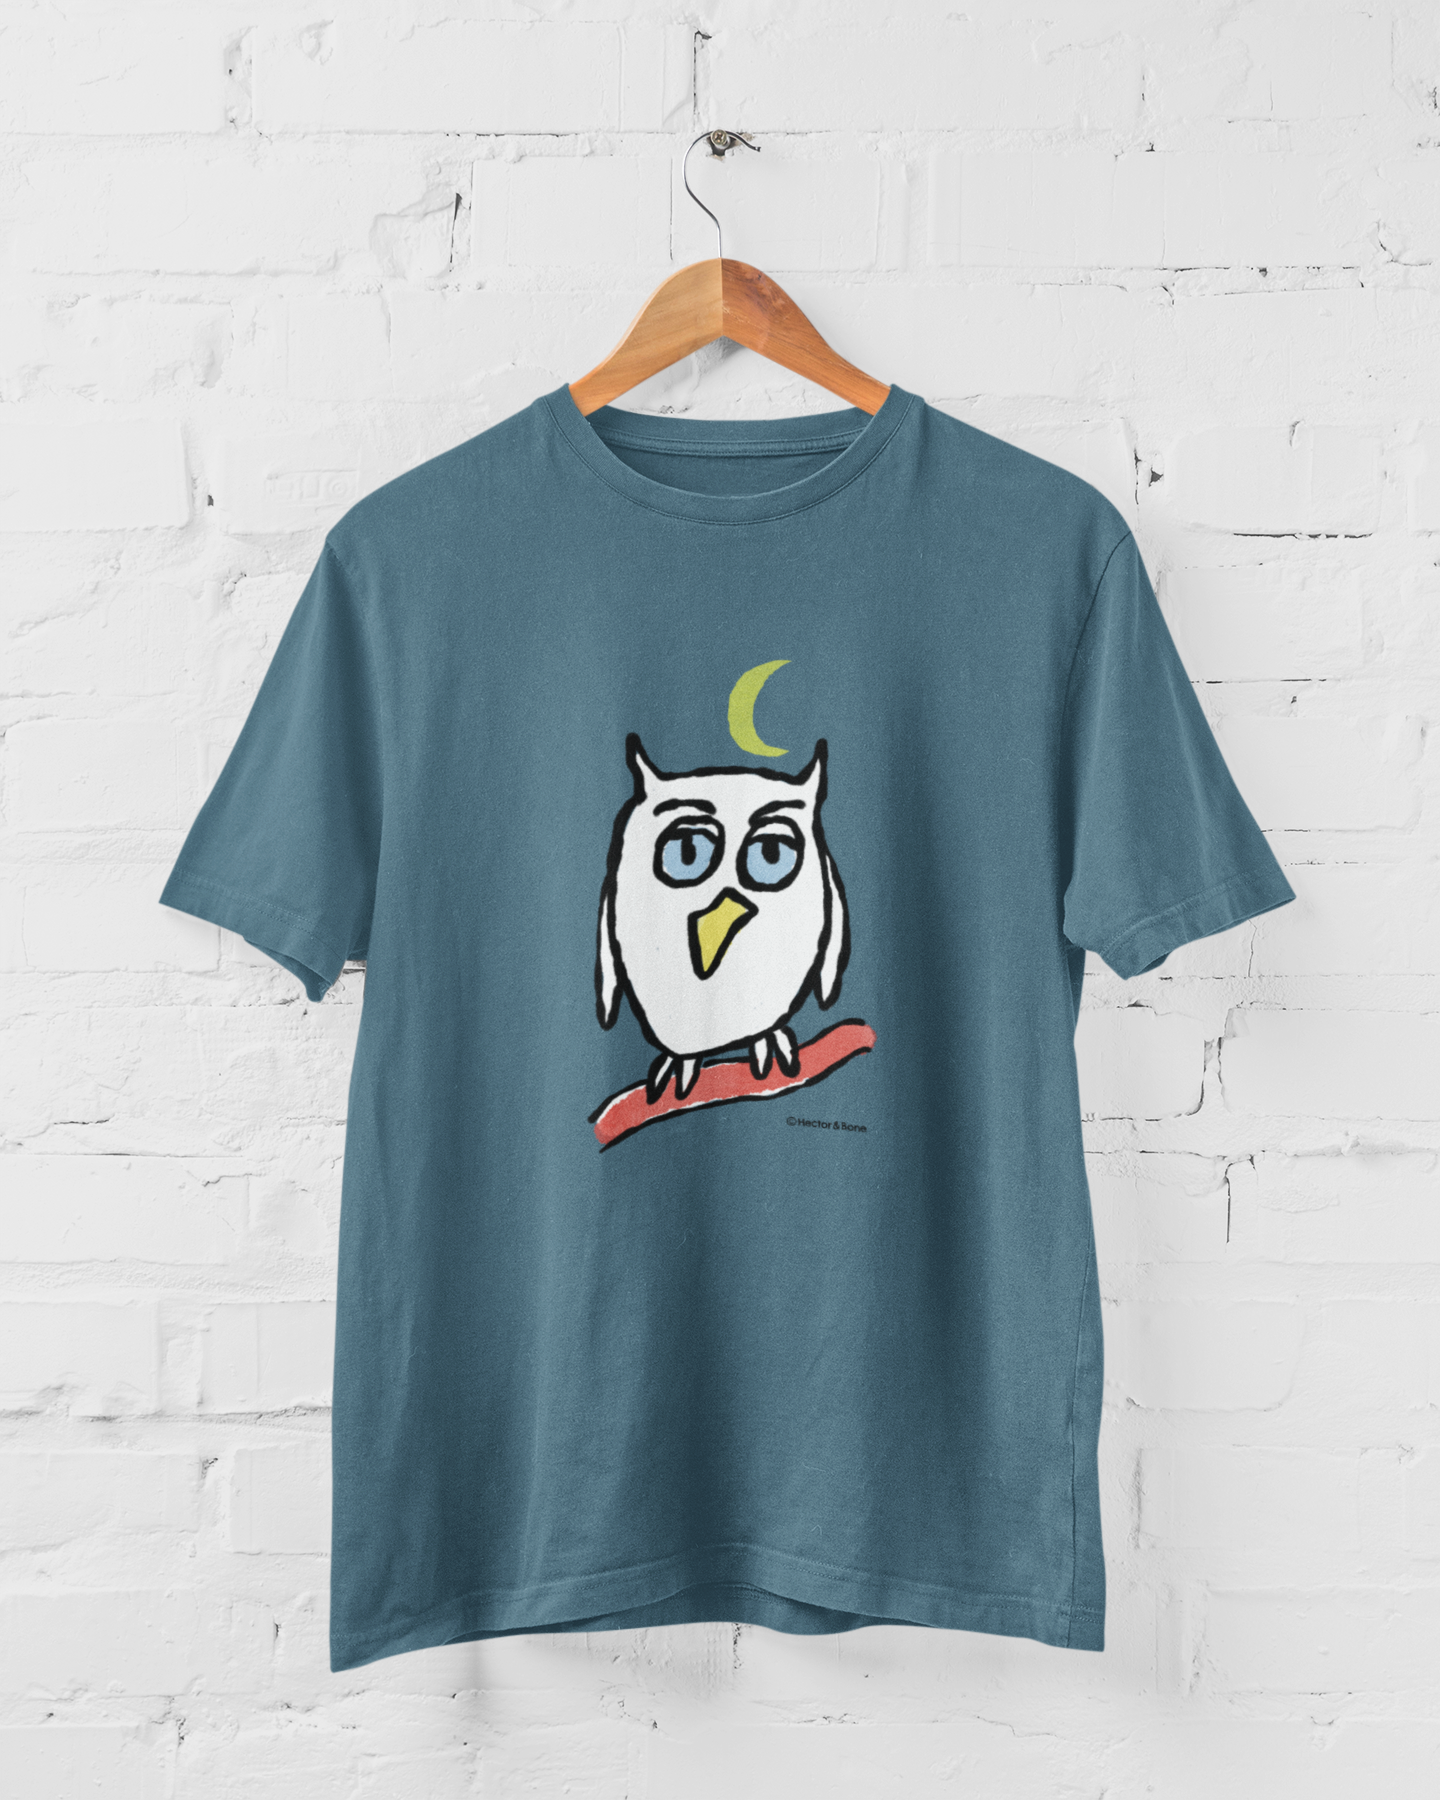 Night Owl T-shirt - Stargazer blue colour vegan cute illustrated Owl T-shirts by Hector and Bone